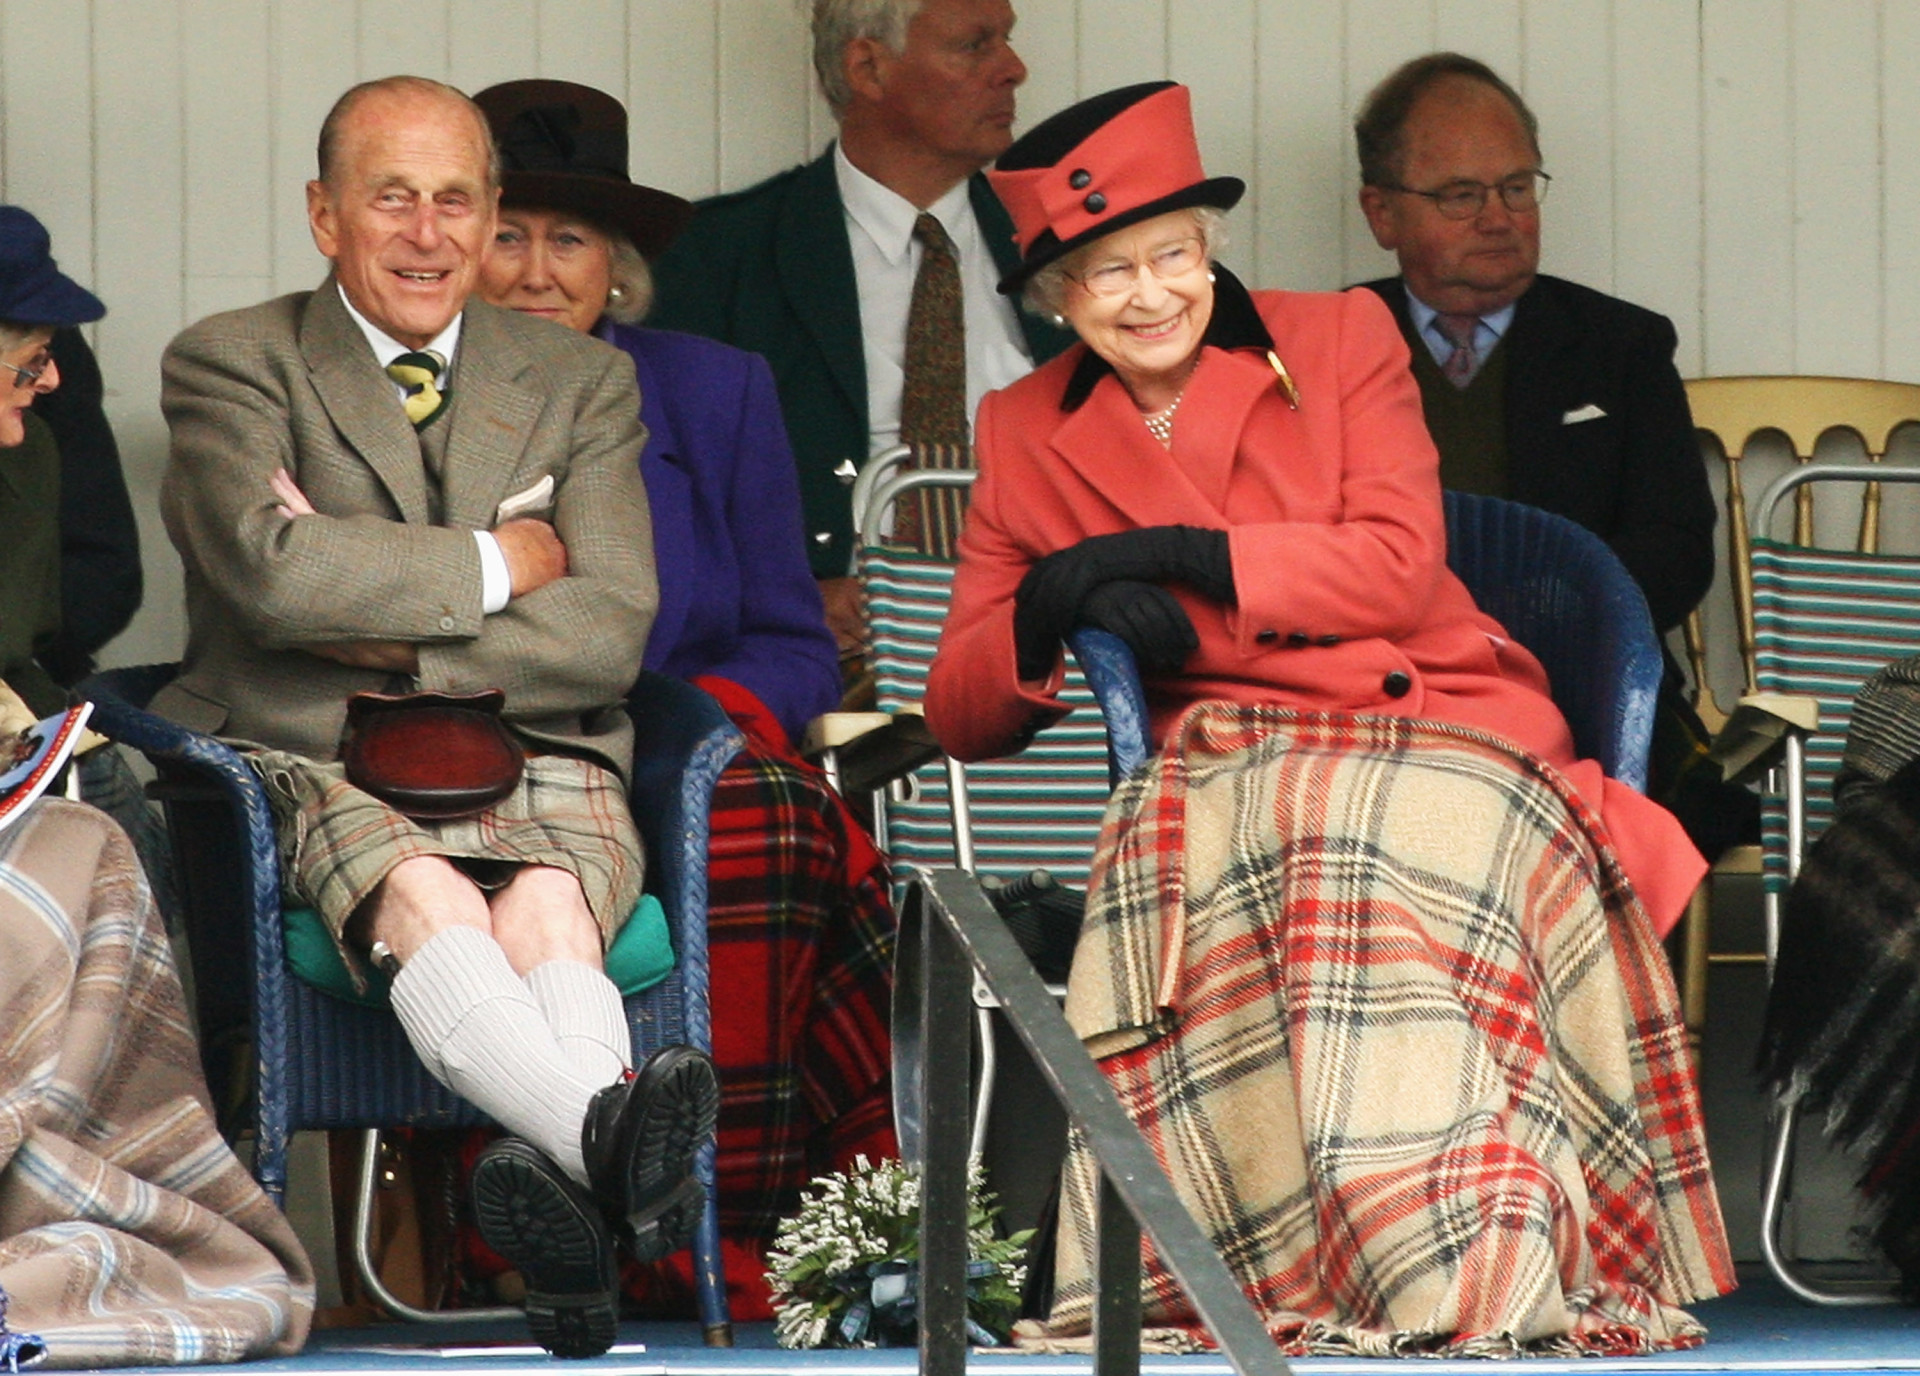 Queen Elizabeth II and Prince Philip laugh as they watch the games during the Annual Braemar Highland Gathering.<p><a href="https://www.msn.com/en-nz/community/channel/vid-7xx8mnucu55yw63we9va2gwr7uihbxwc68fxqp25x6tg4ftibpra?cvid=94631541bc0f4f89bfd59158d696ad7e">Follow us and access great exclusive content every day</a></p>